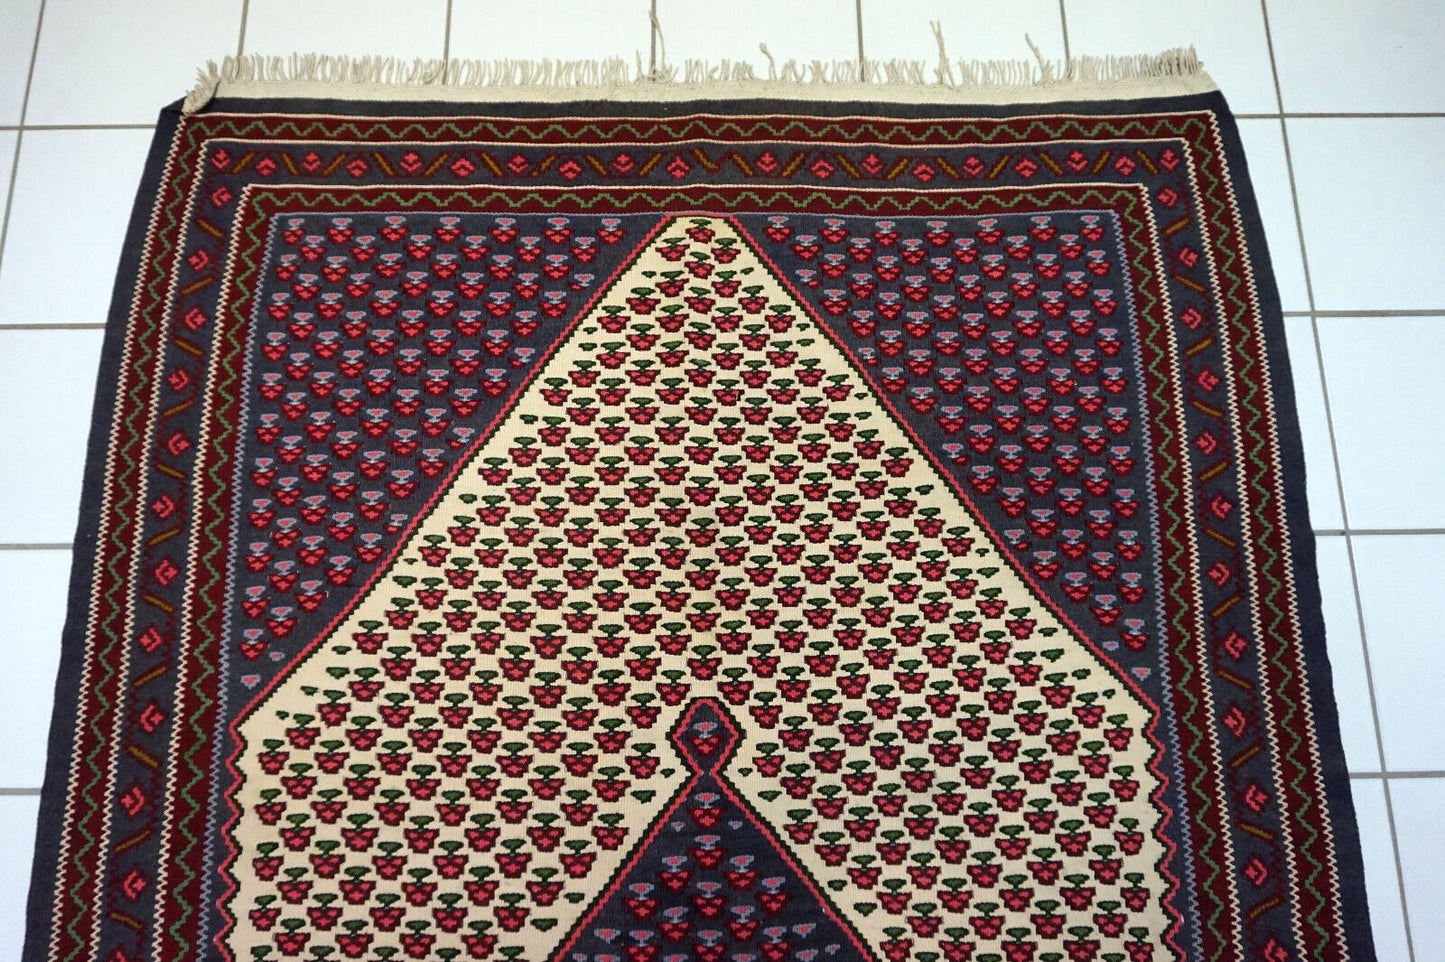 Close-up of intricate Senneh style pattern on vintage kilim